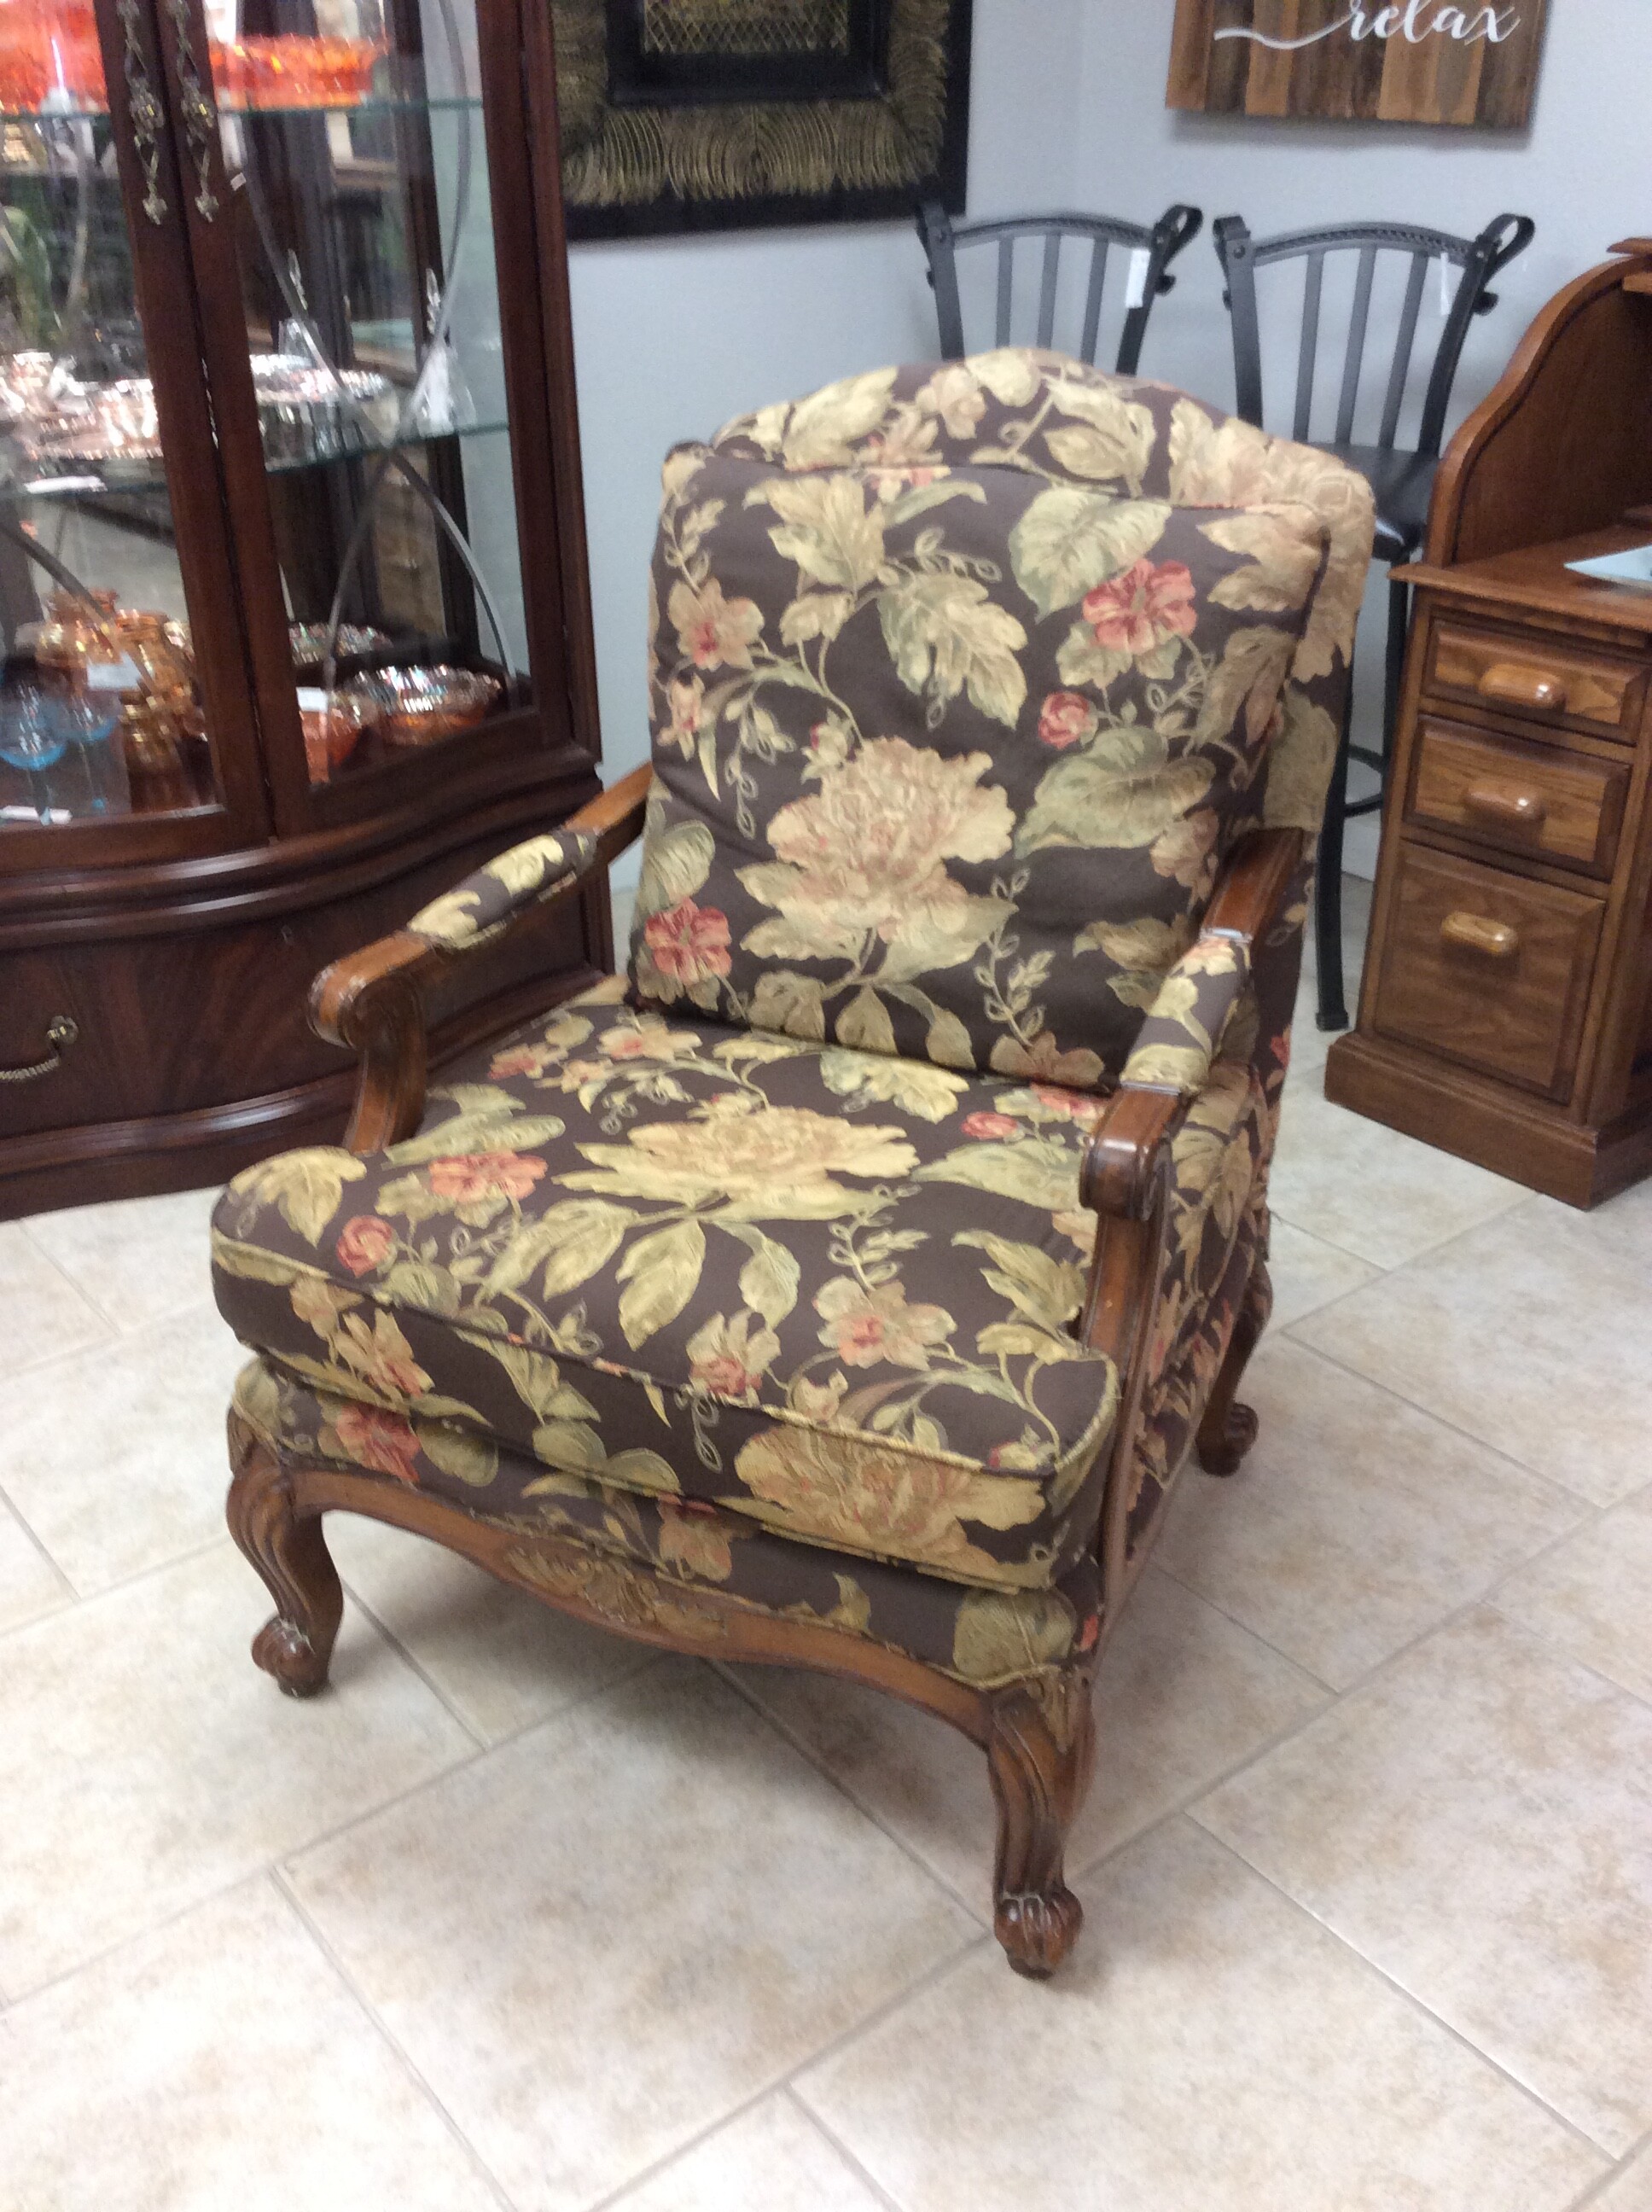 This is a floral and wood accent chair.